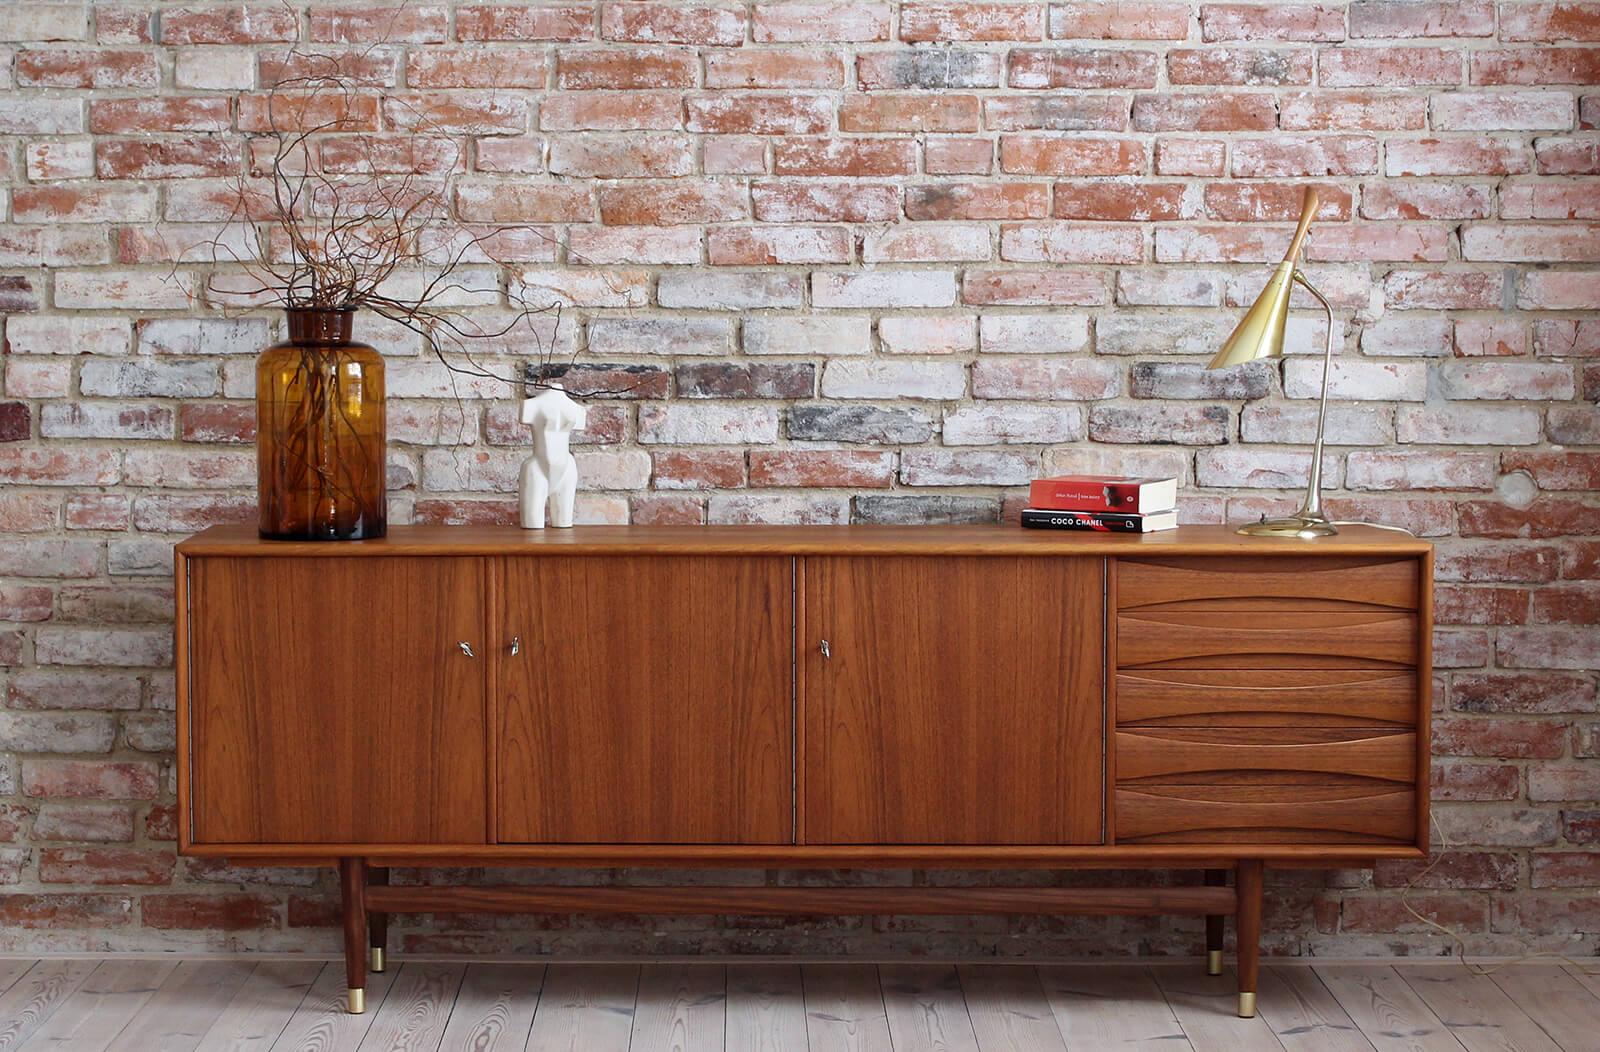 This is a quite rare Sven Andersen teak sideboard designed and manufactured in Norway circa second half of the 1950s. The piece features three doors that reveal lots of storage space and five drawers in the section on the right. The sideboard